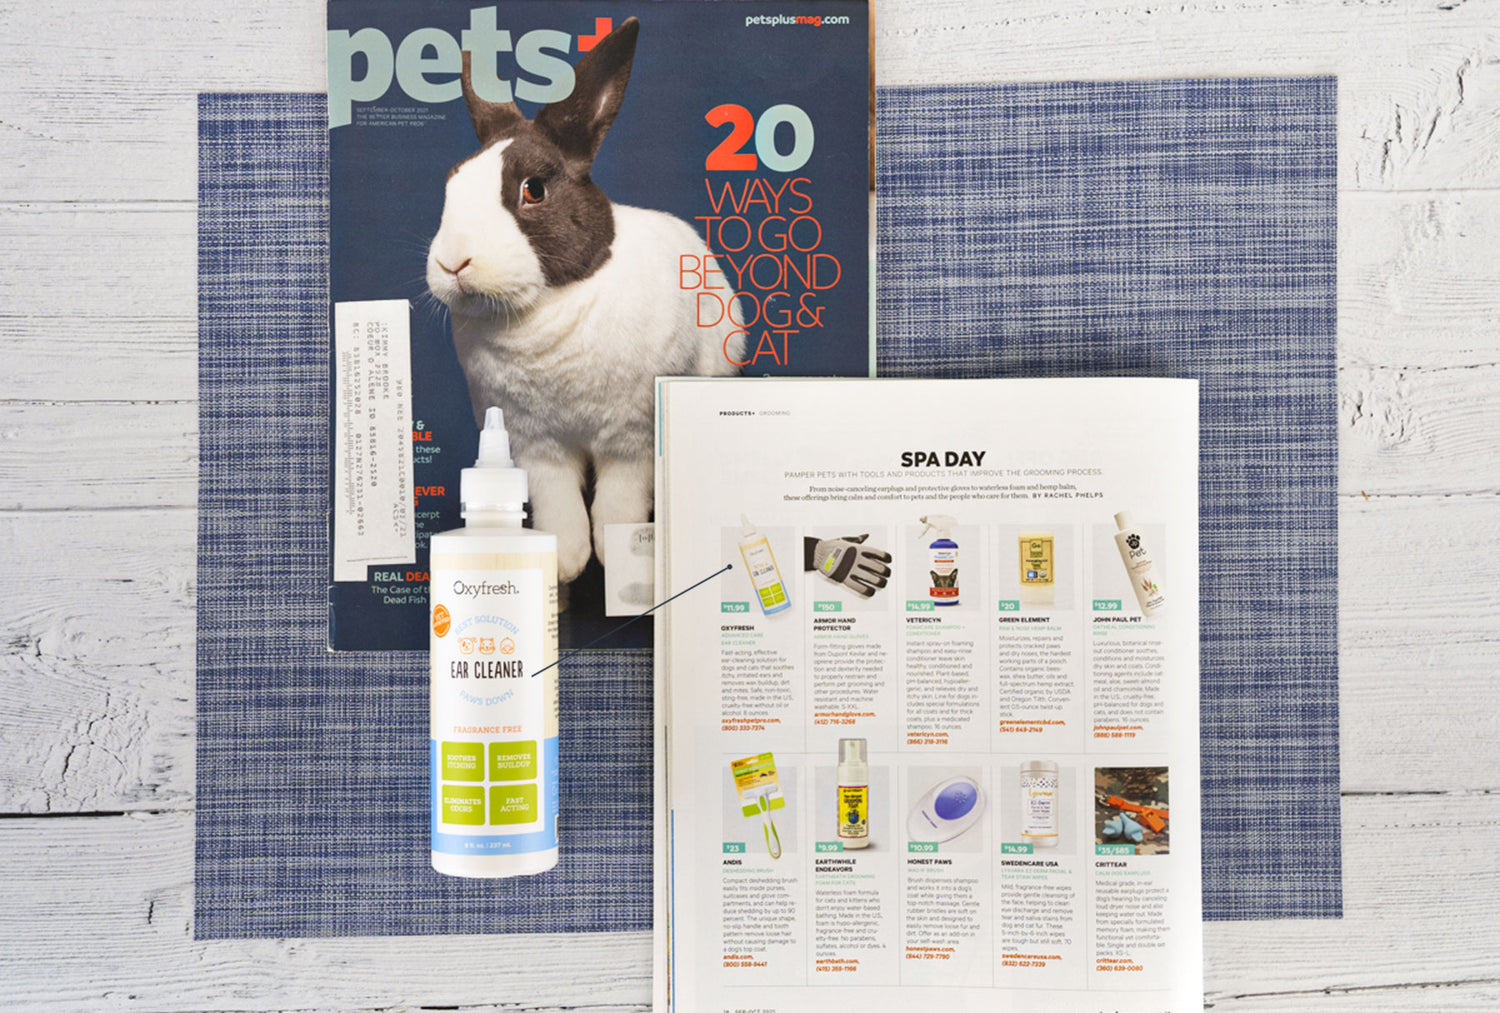 oxyfresh pet ear cleaner next to article in Pets+ magazine